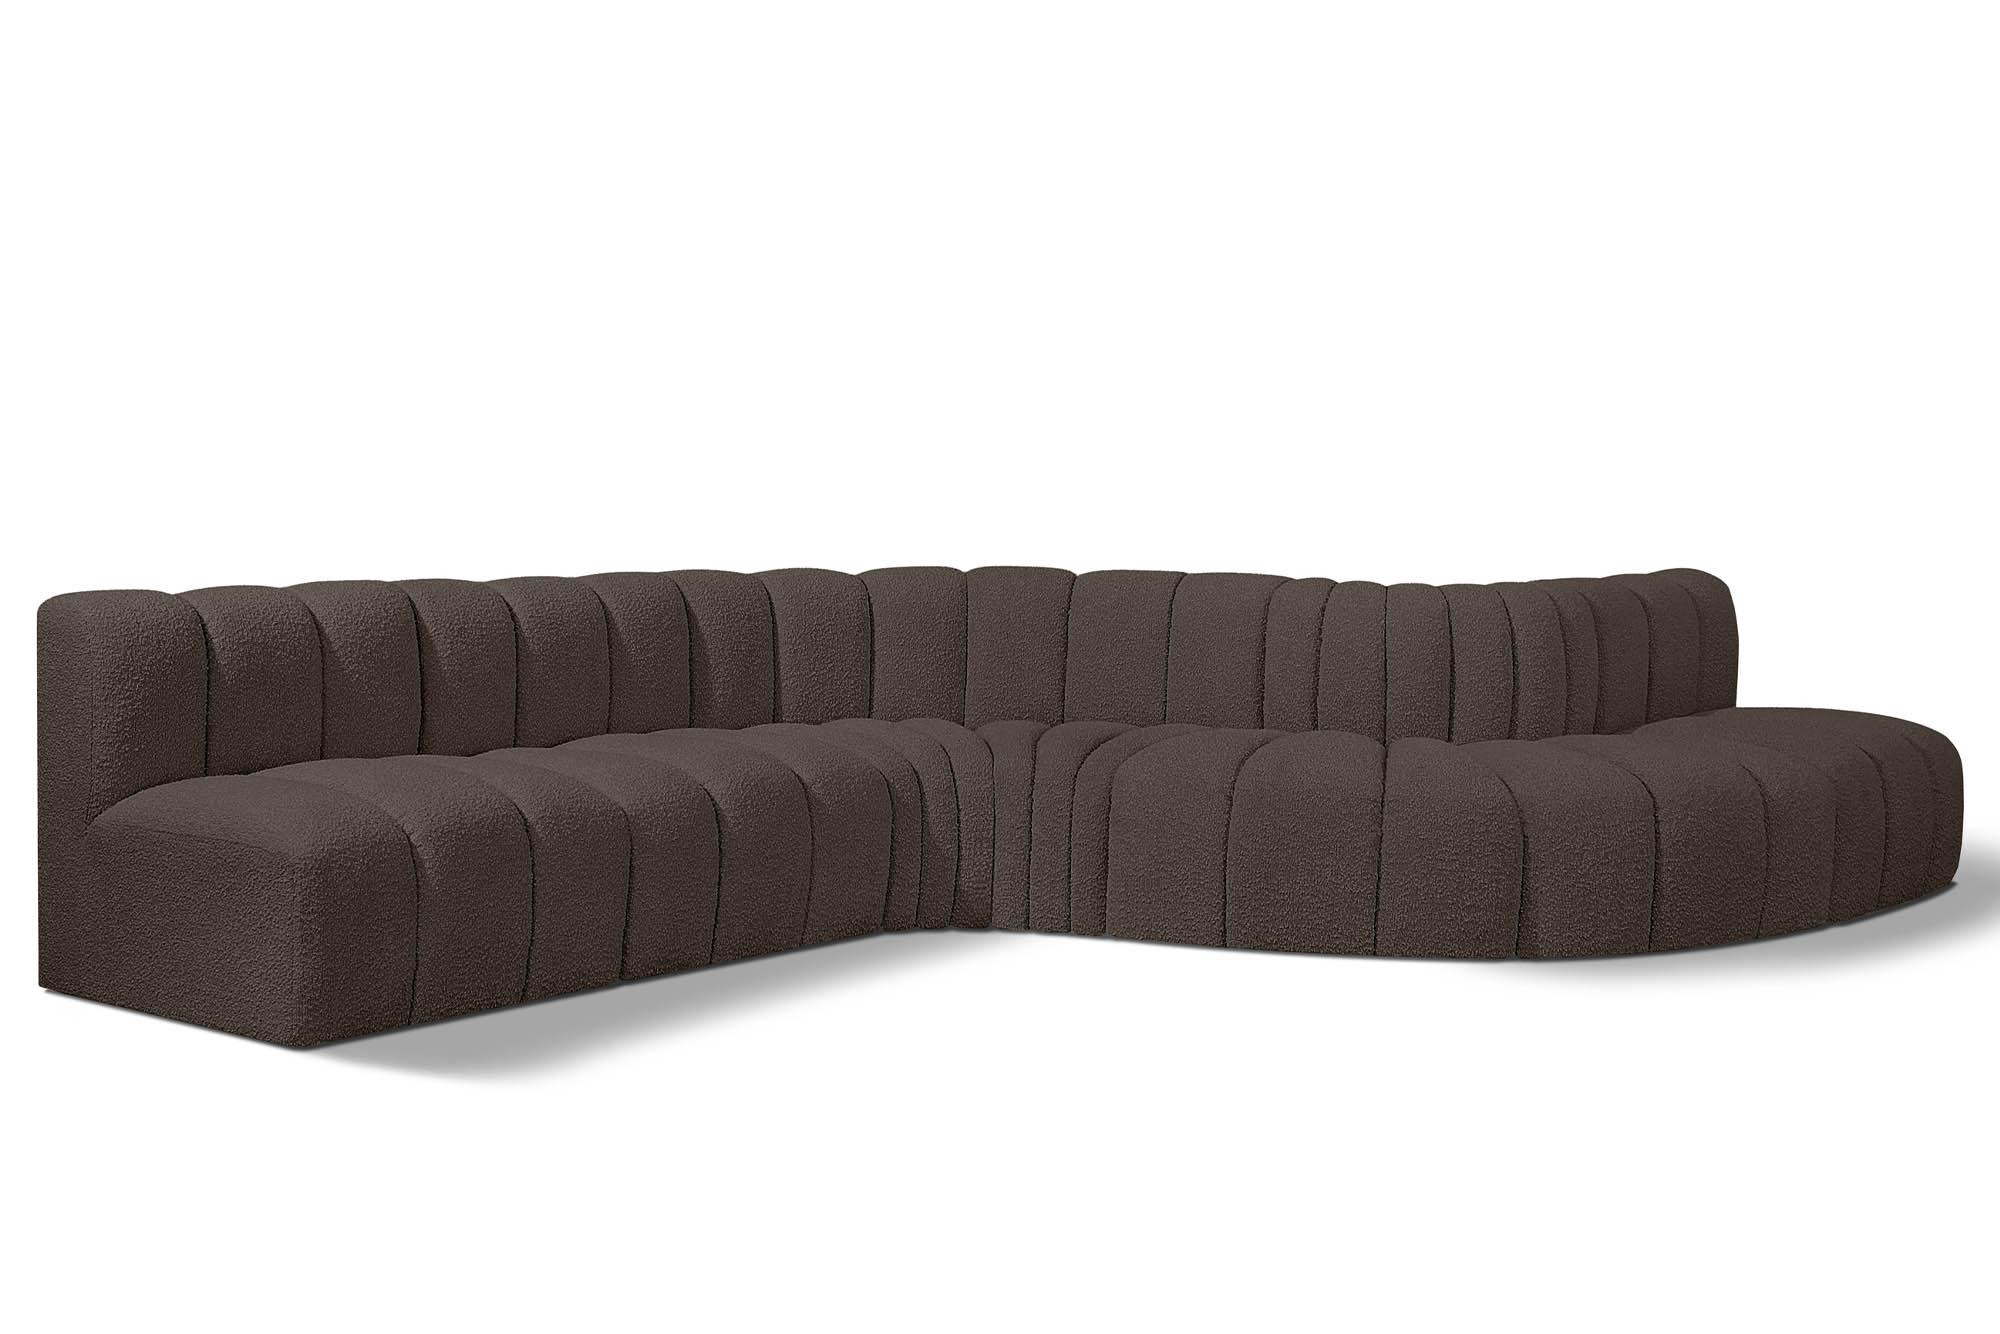 Contemporary, Modern Modular Sectional Sofa ARC 102Brown-S7C 102Brown-S7C in Brown 